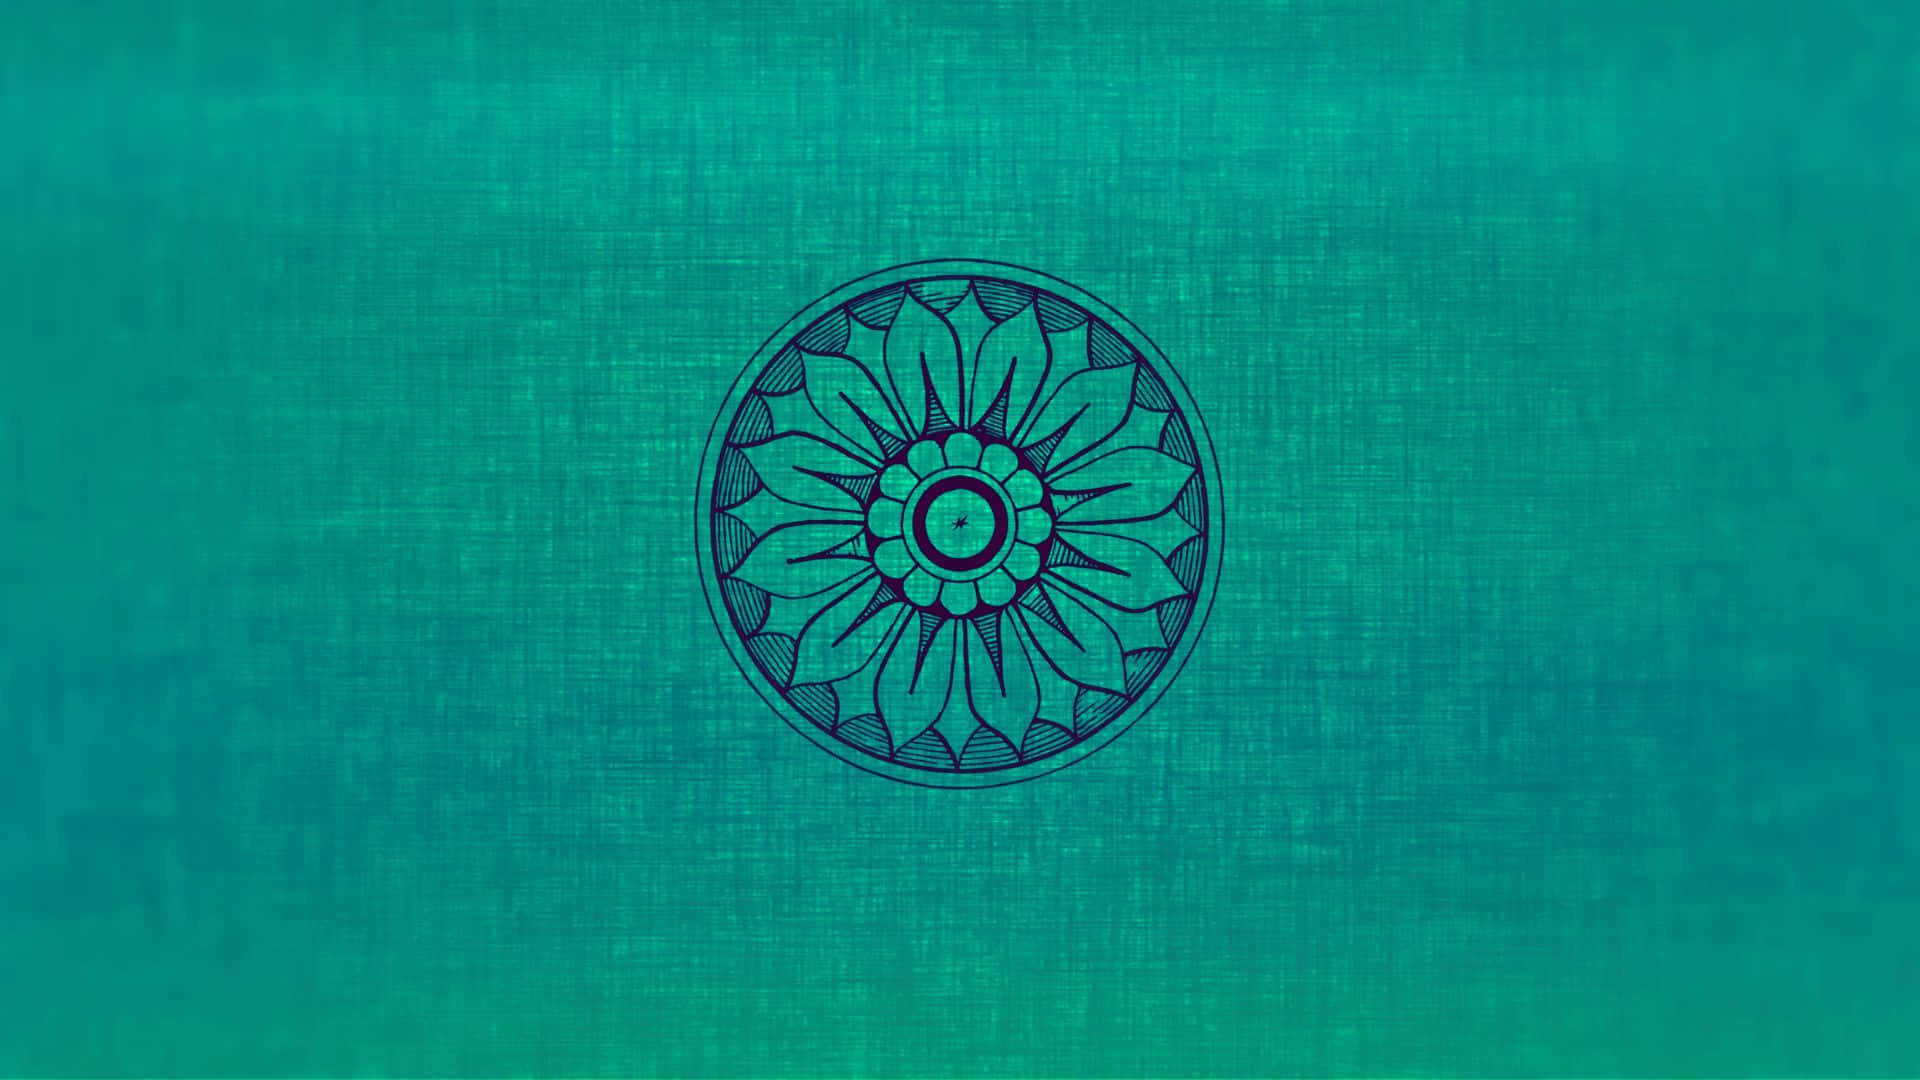 A calming, tranquil Turquoise background